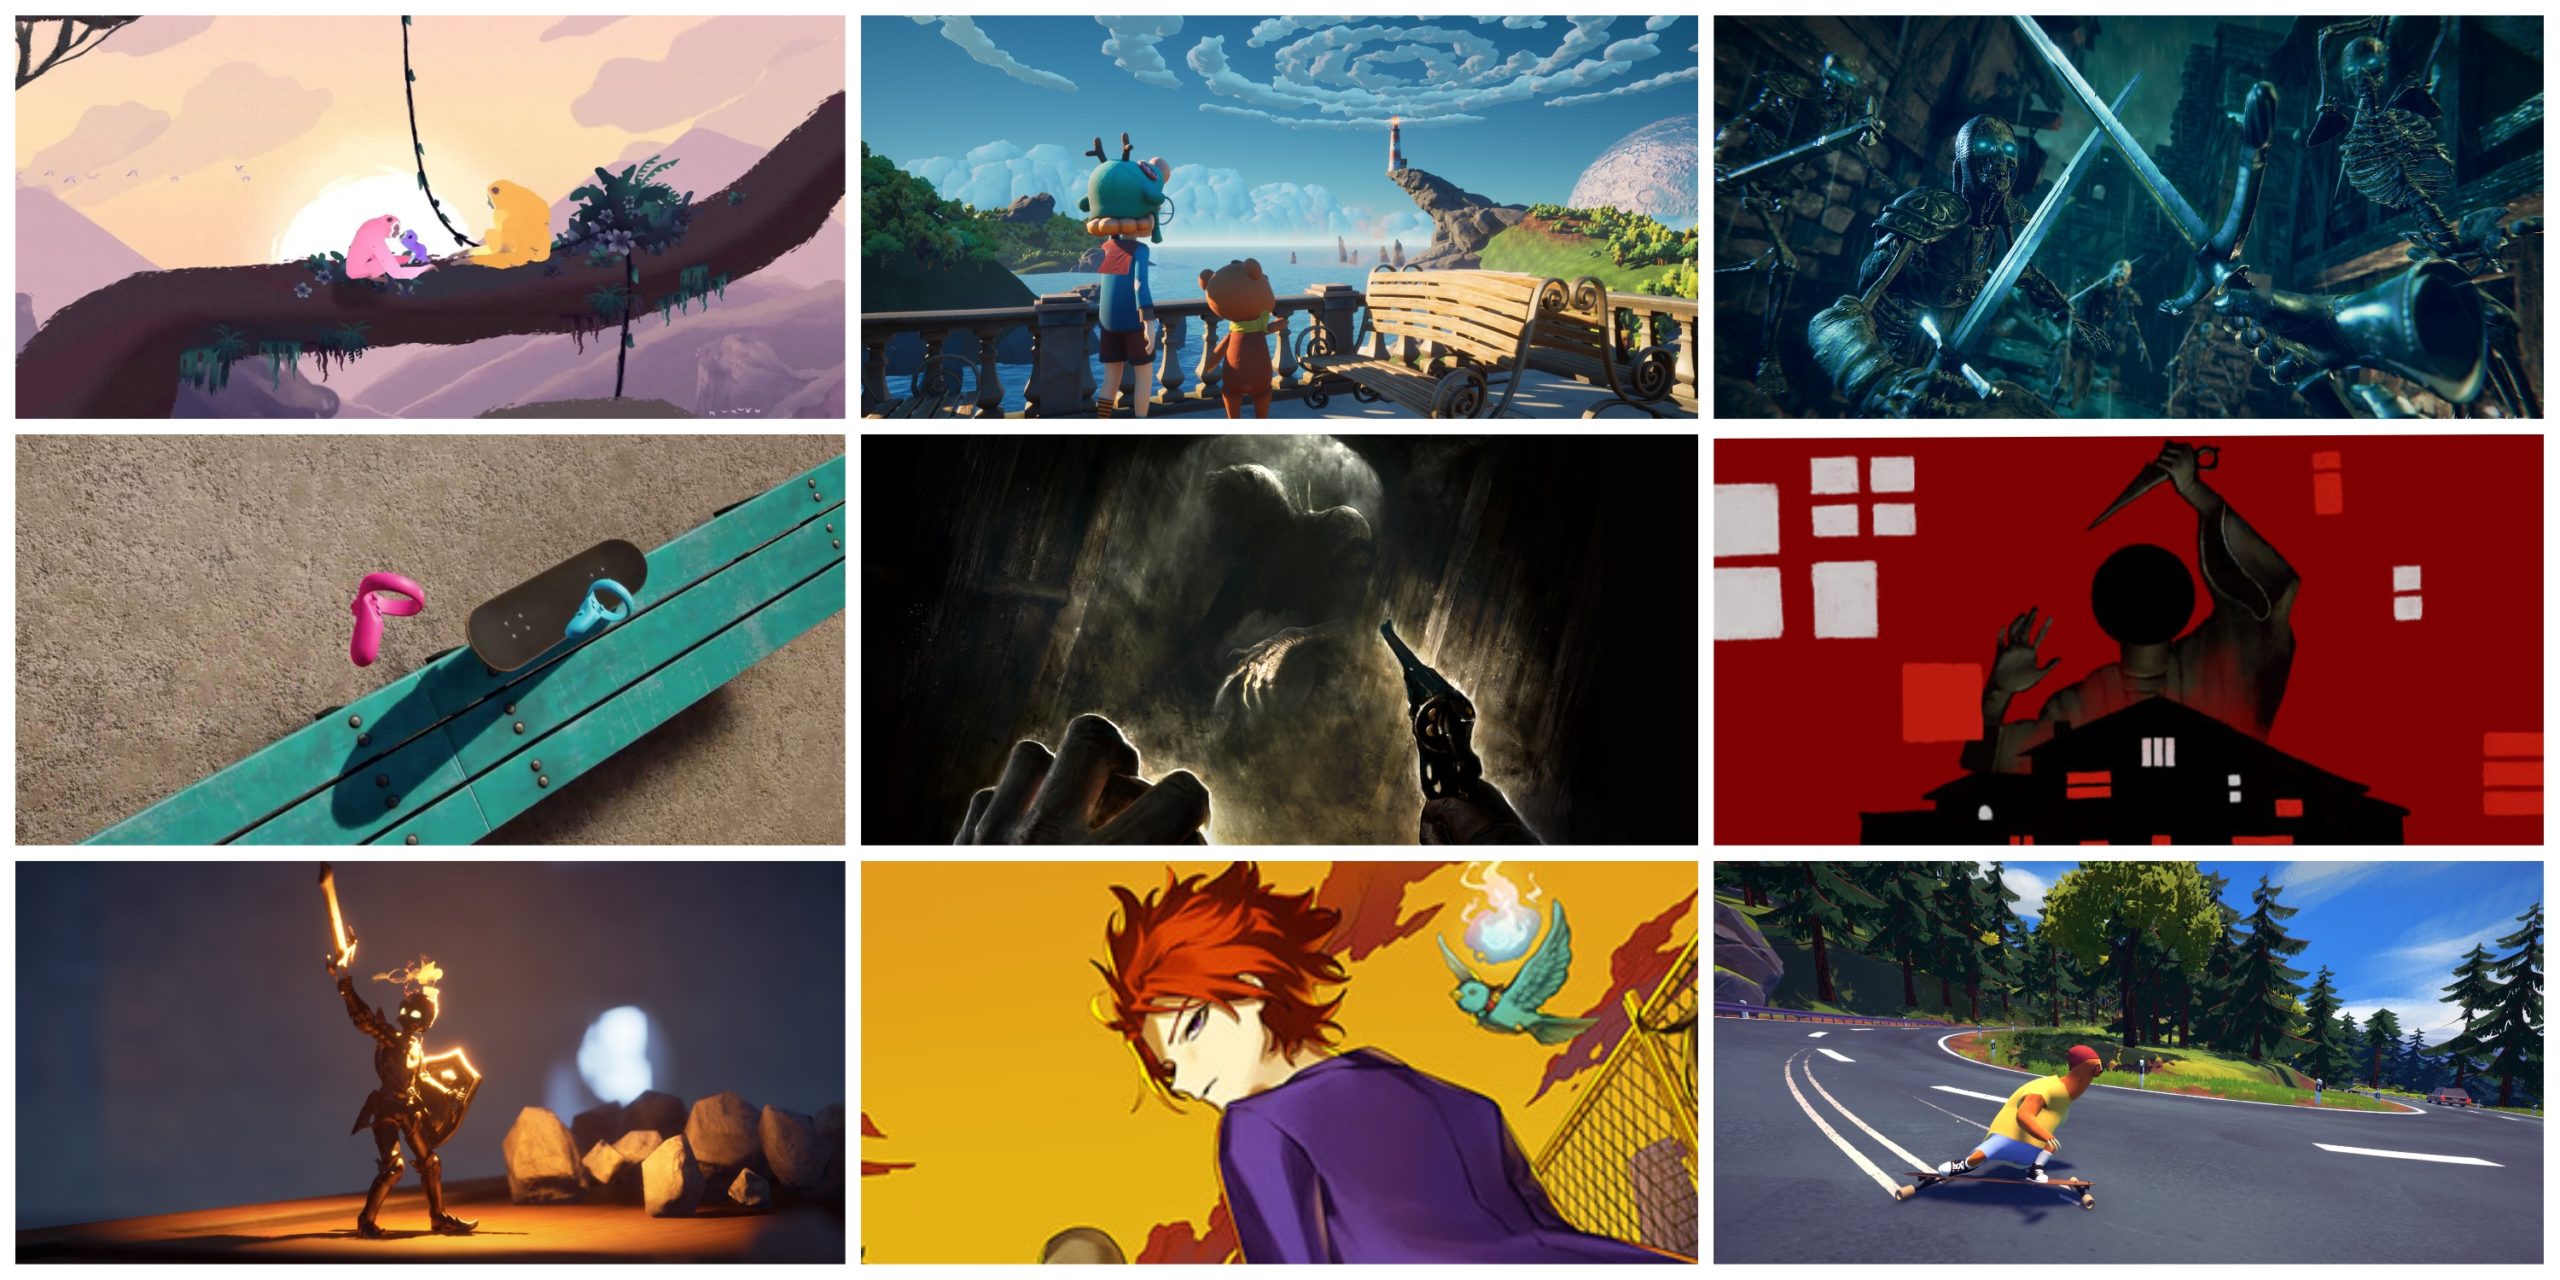 9 Panel Image showing off different Indie Games on the list.